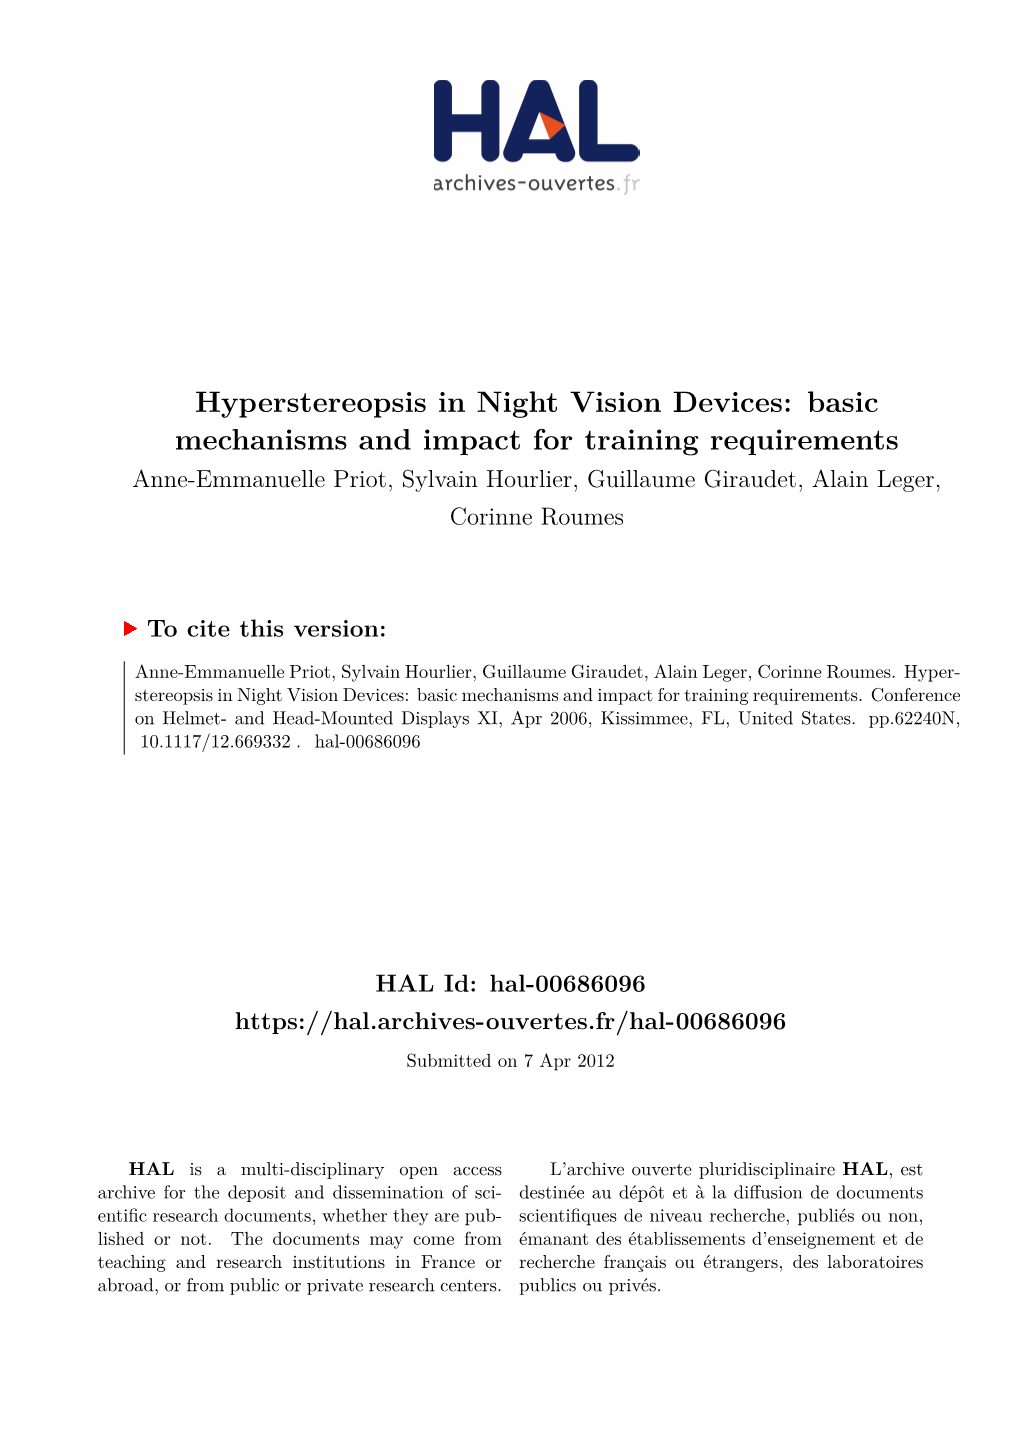 Hyperstereopsis in Night Vision Devices: Basic Mechanisms And